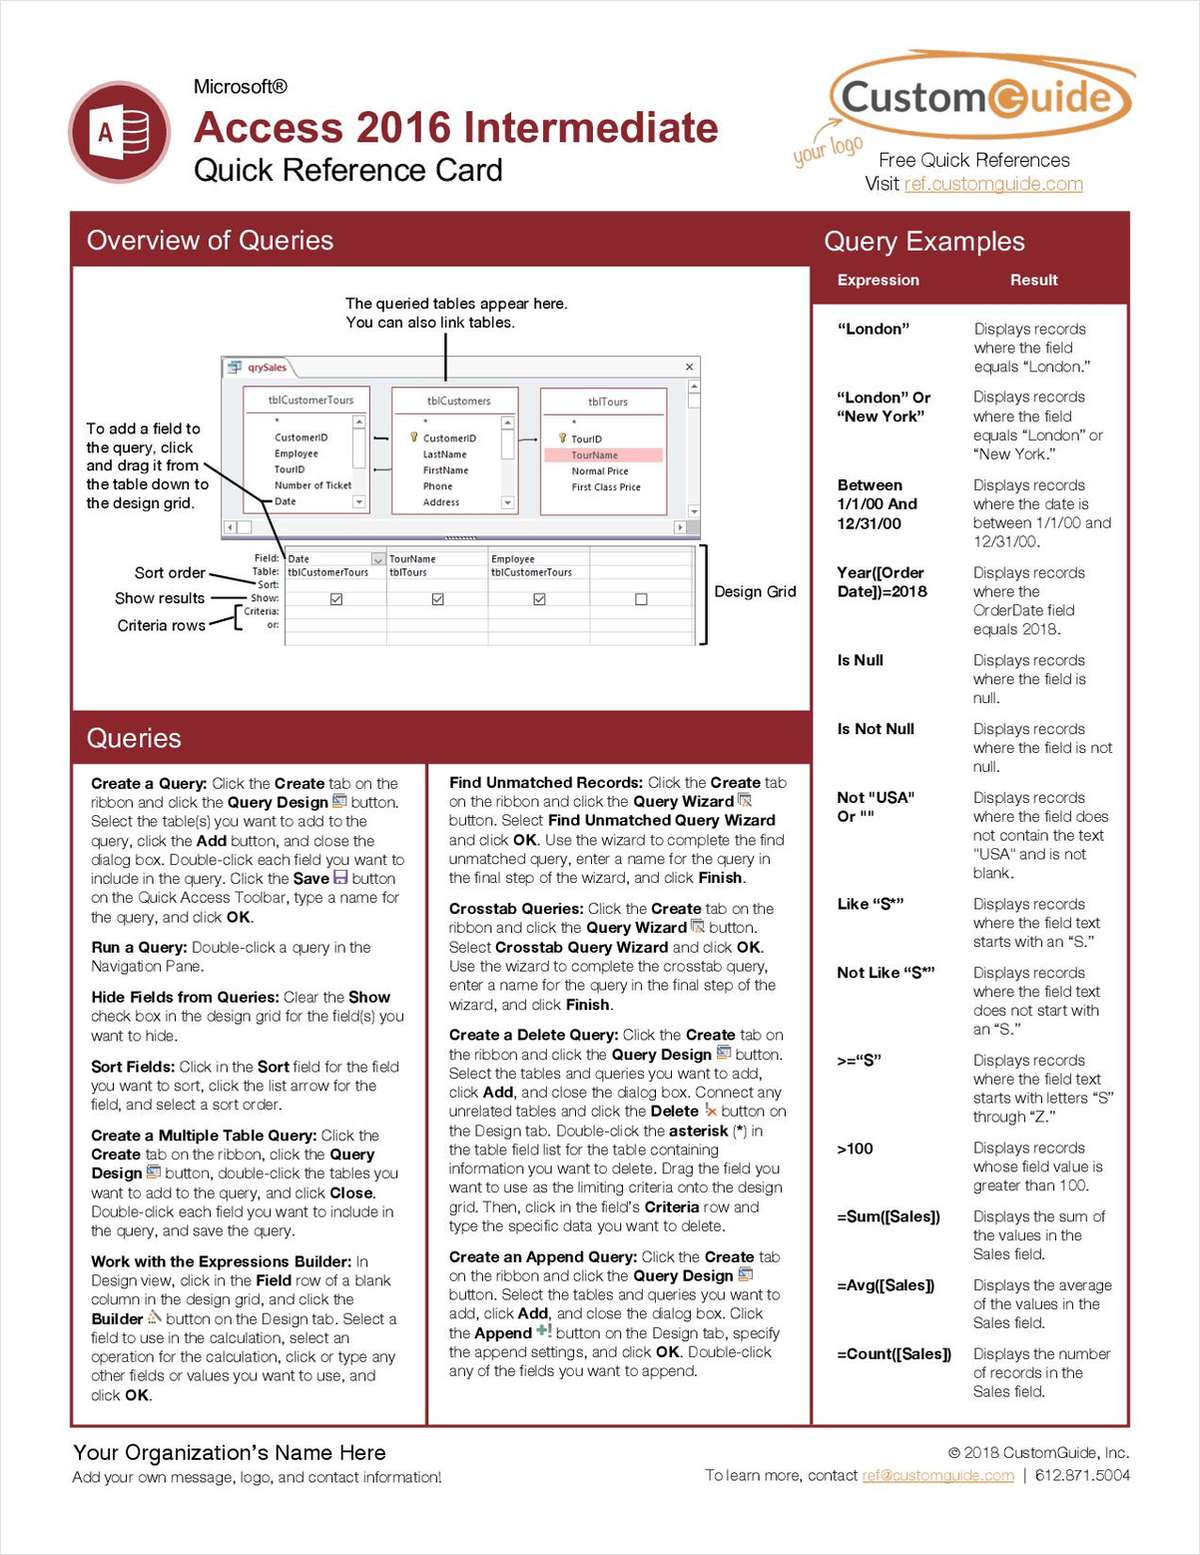 Microsoft Access 2016 Intermediate - Free Quick Reference Card